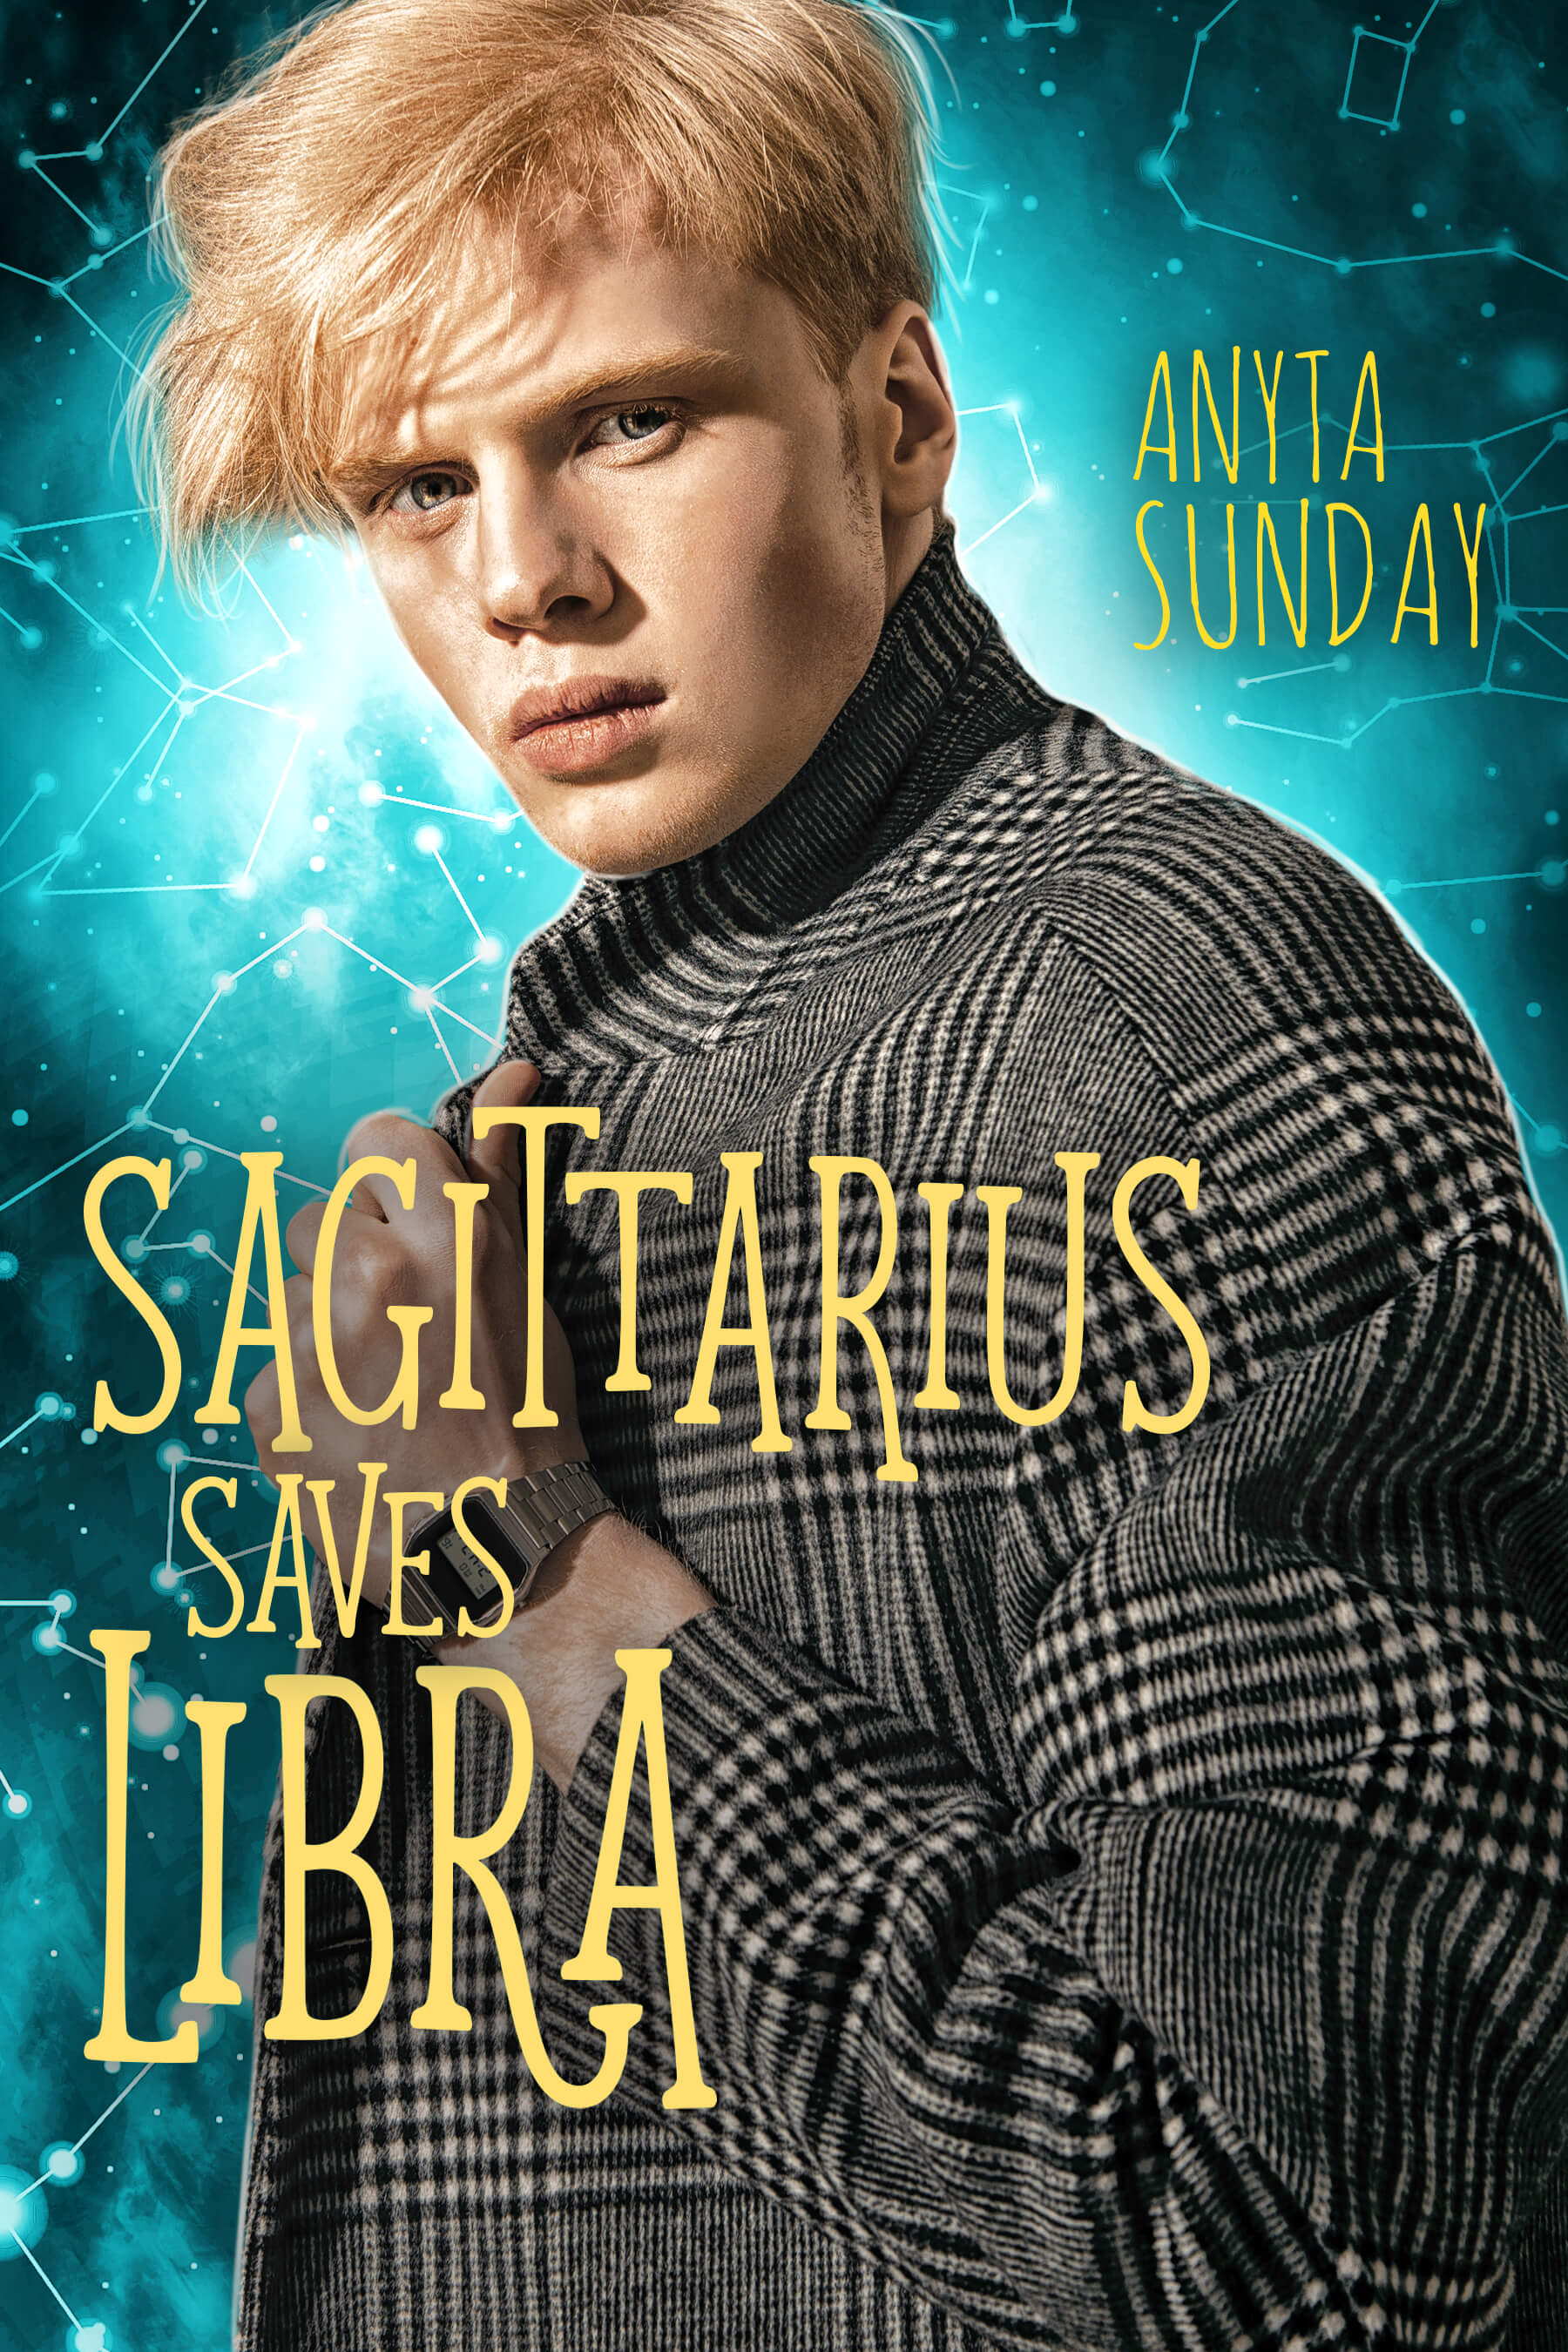 Sagittarius Saves Libra sixth gay romance novel in the signs of love series by Anyta Sunday